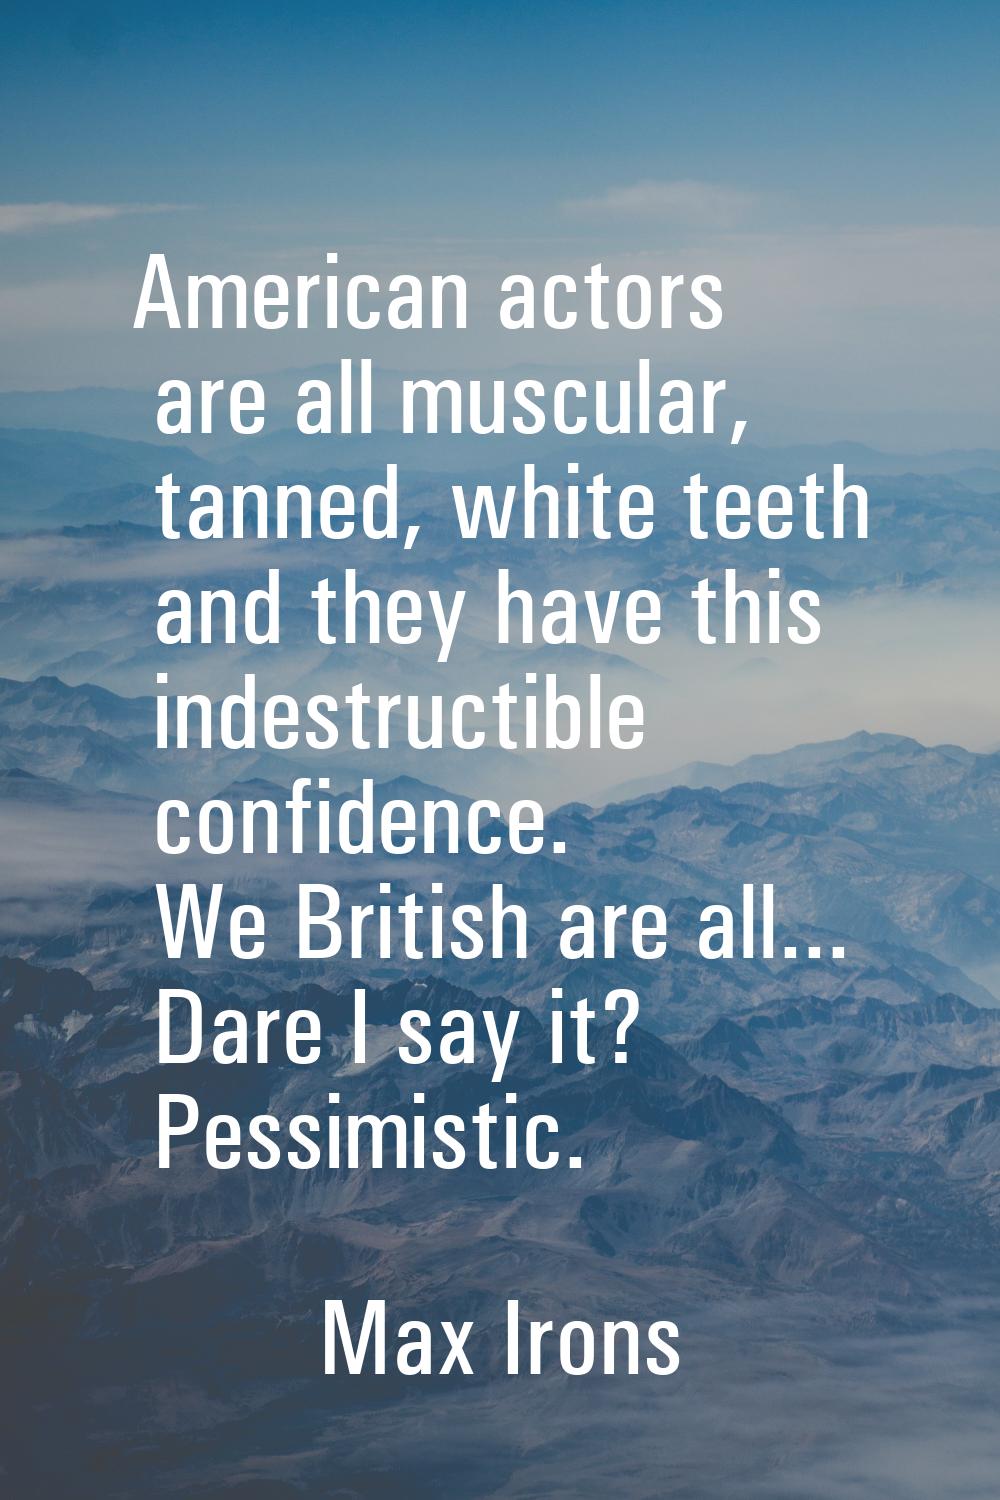 American actors are all muscular, tanned, white teeth and they have this indestructible confidence.